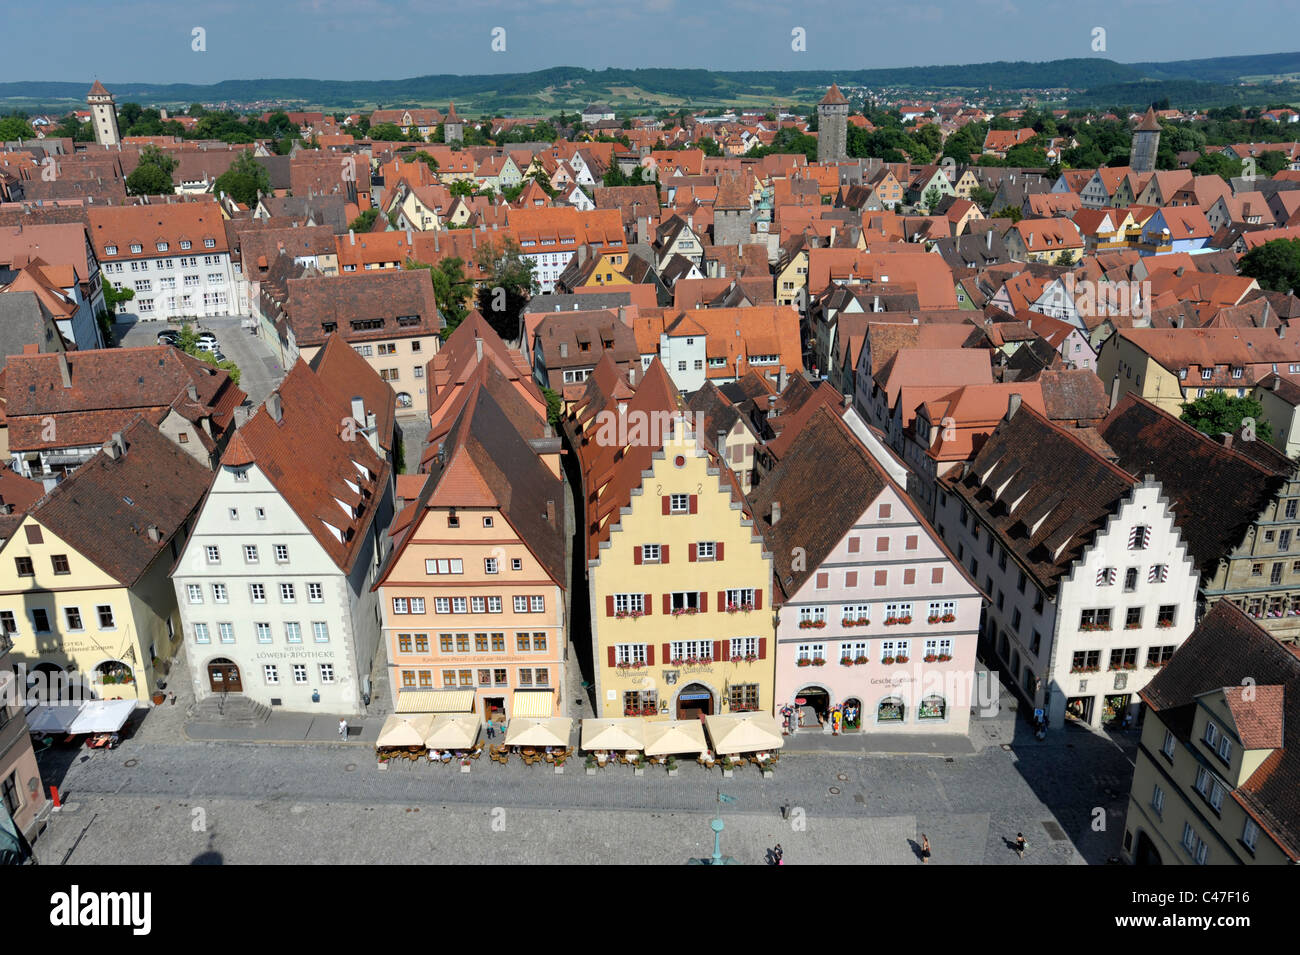 panorama view over german famous medieval city Rothenburg ob der Tauber with historical old houses Stock Photo